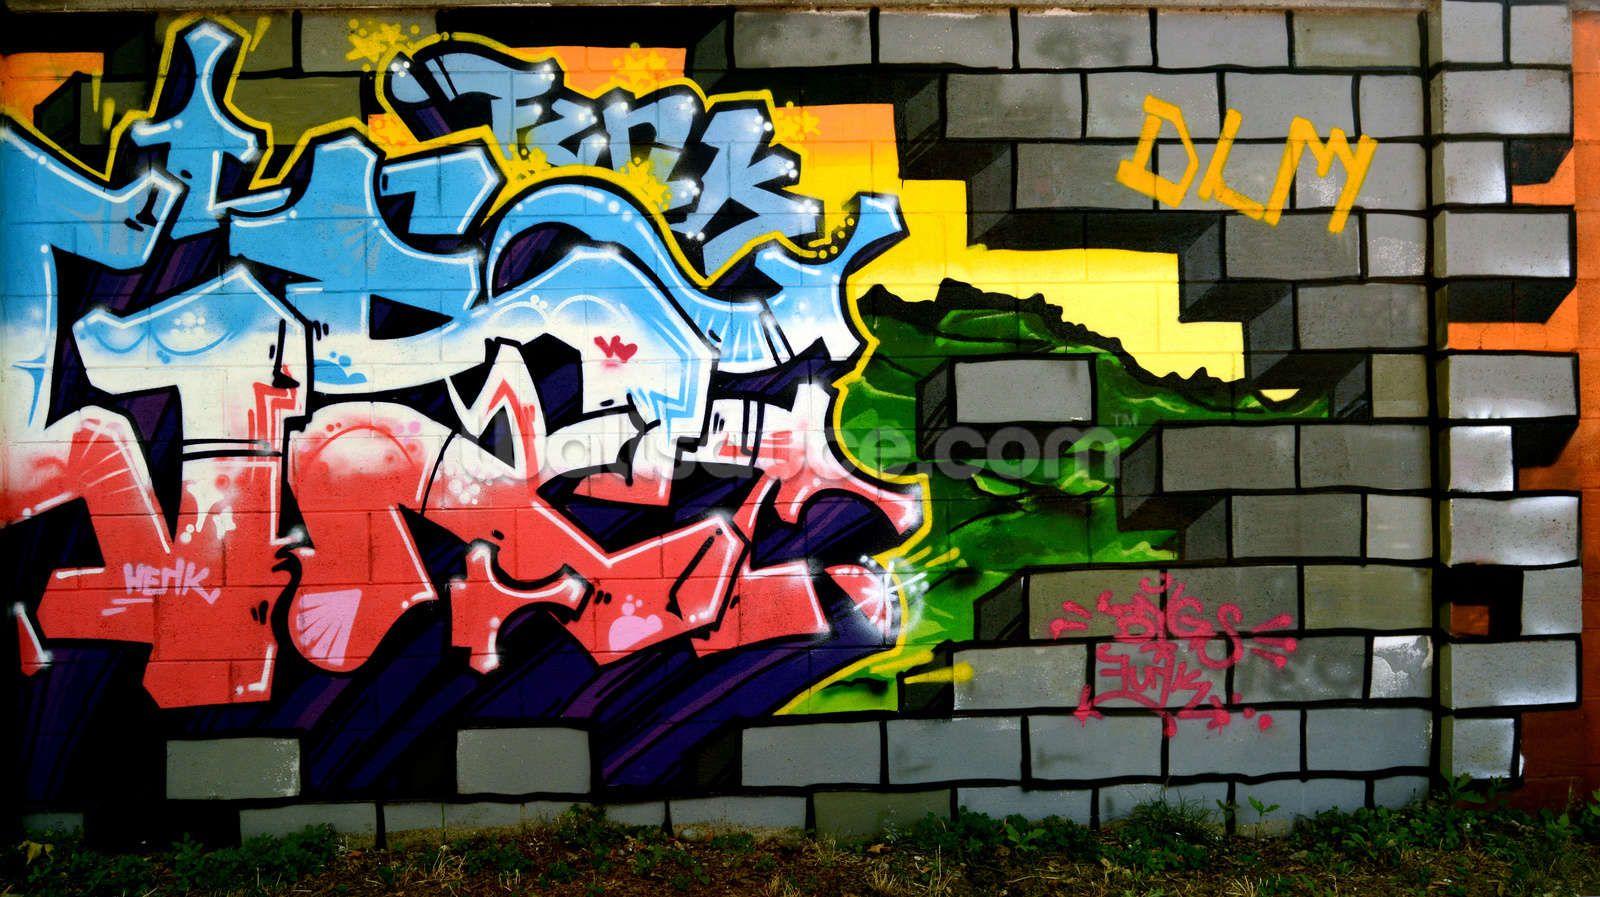 A colorful graffiti wall with some writing on it - Street art